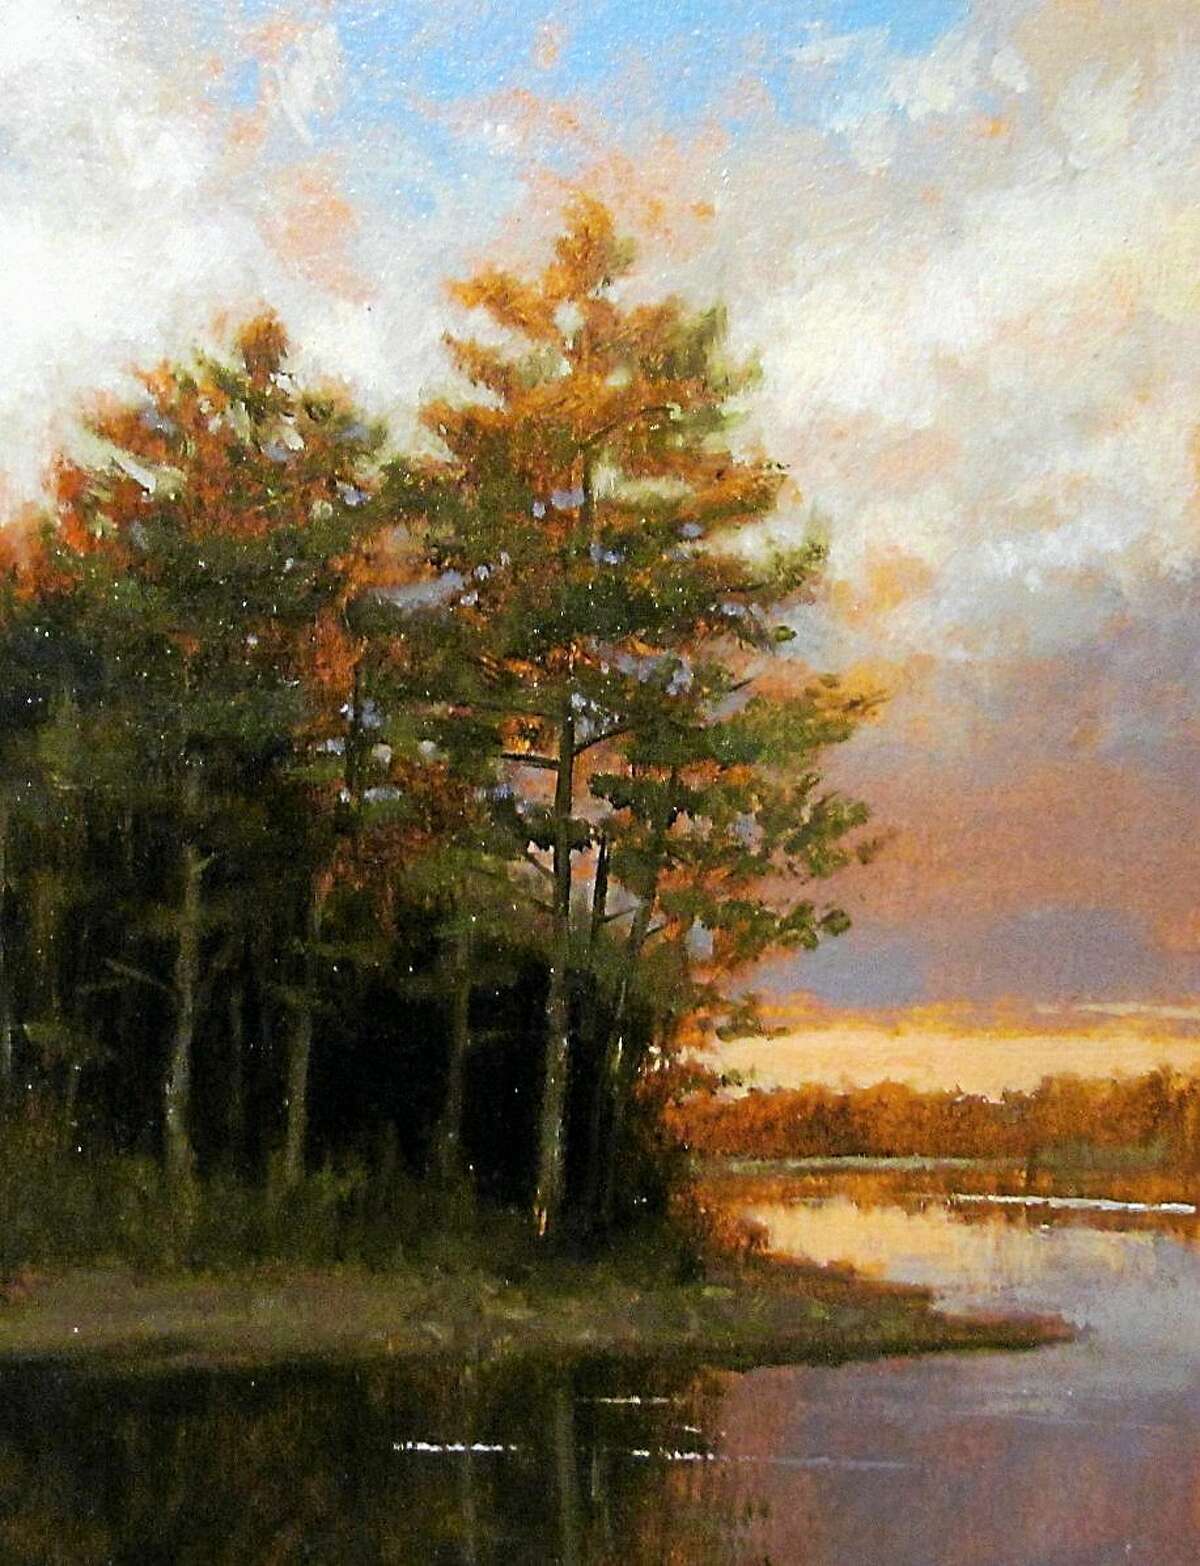 Image courtesy of the artist "Evening at State Line Pond" by Paul Batch.